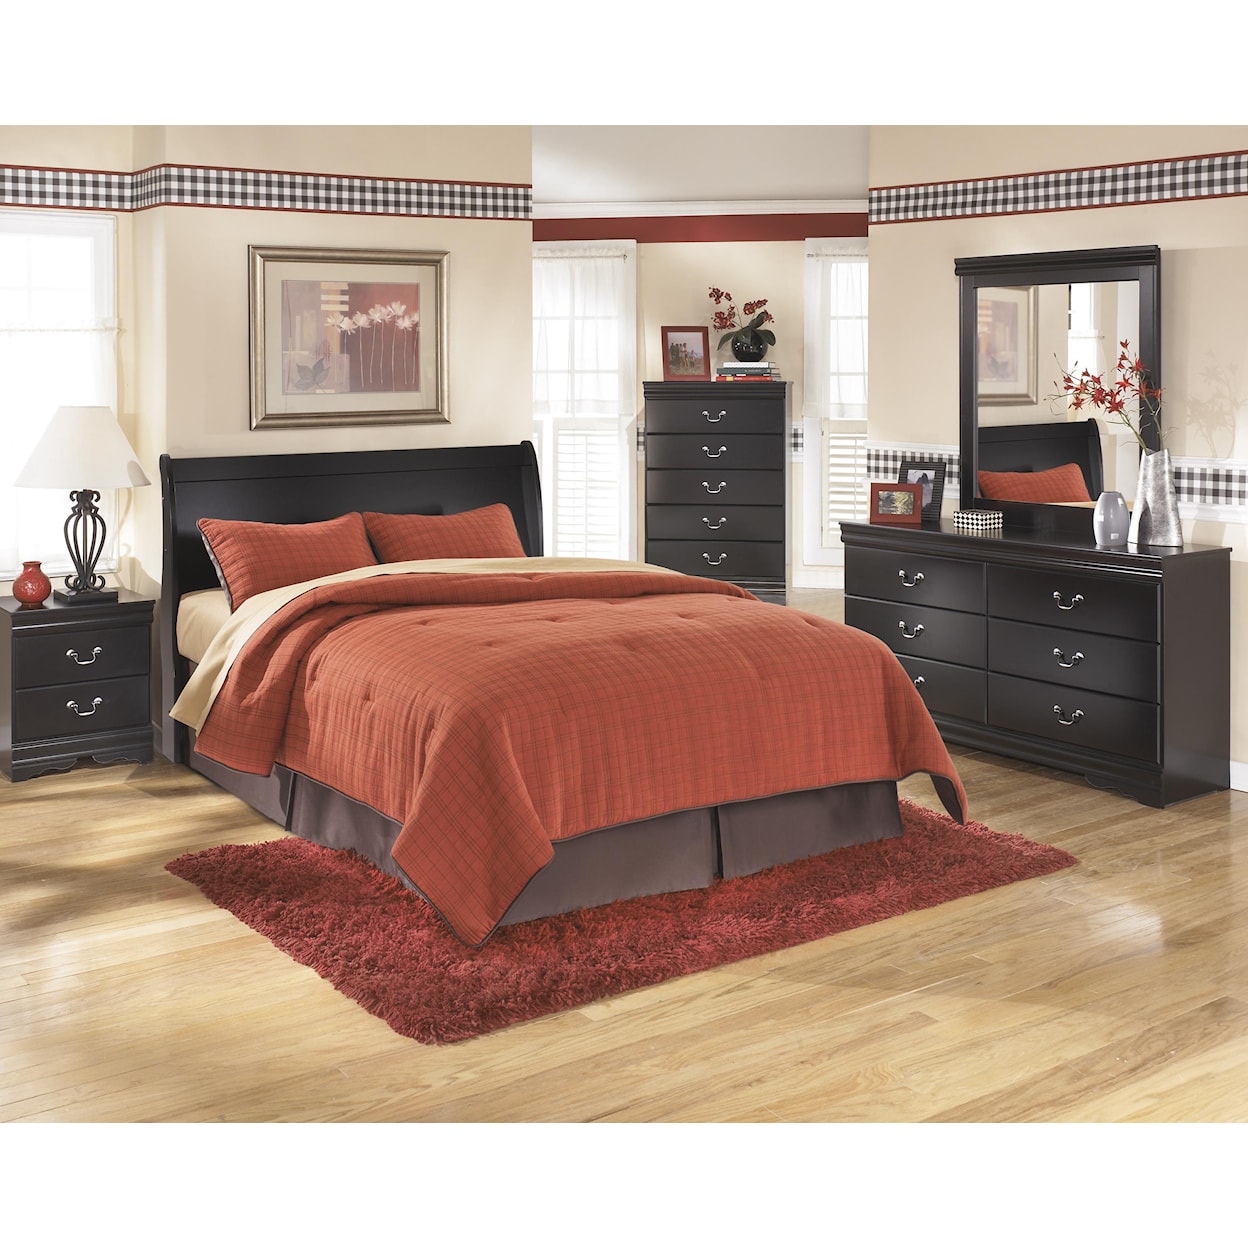 Signature Design by Ashley Furniture Huey Vineyard Queen Bedroom Group